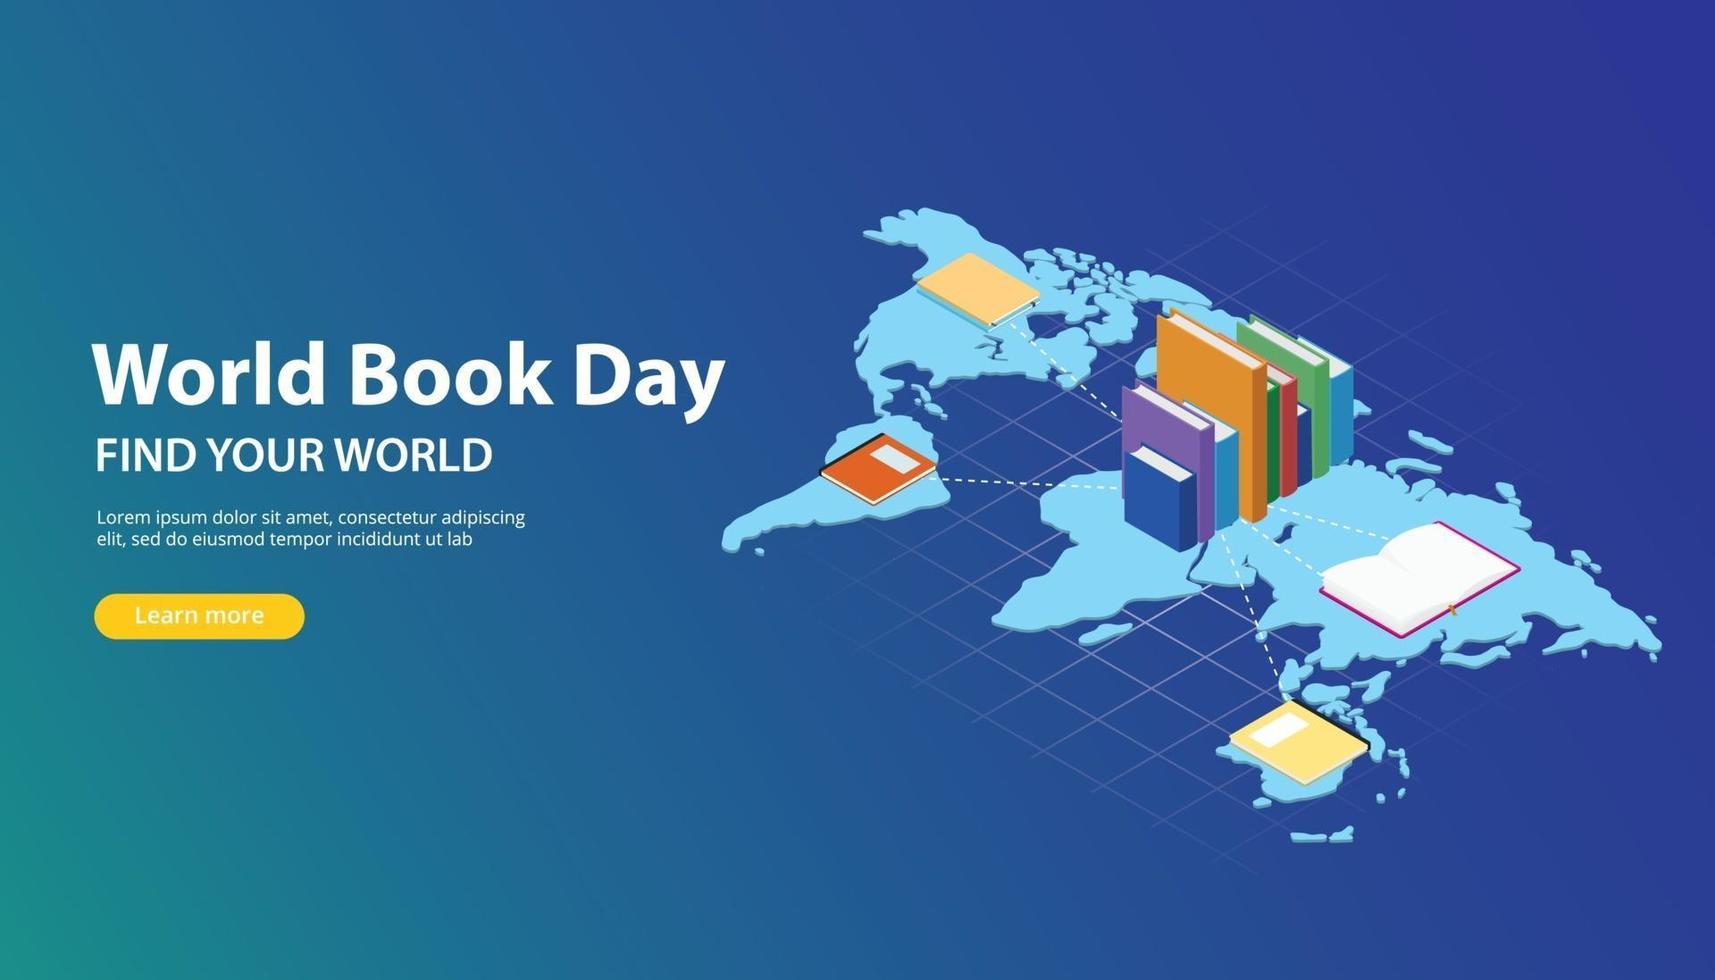 world book day website banner design with world maps vector